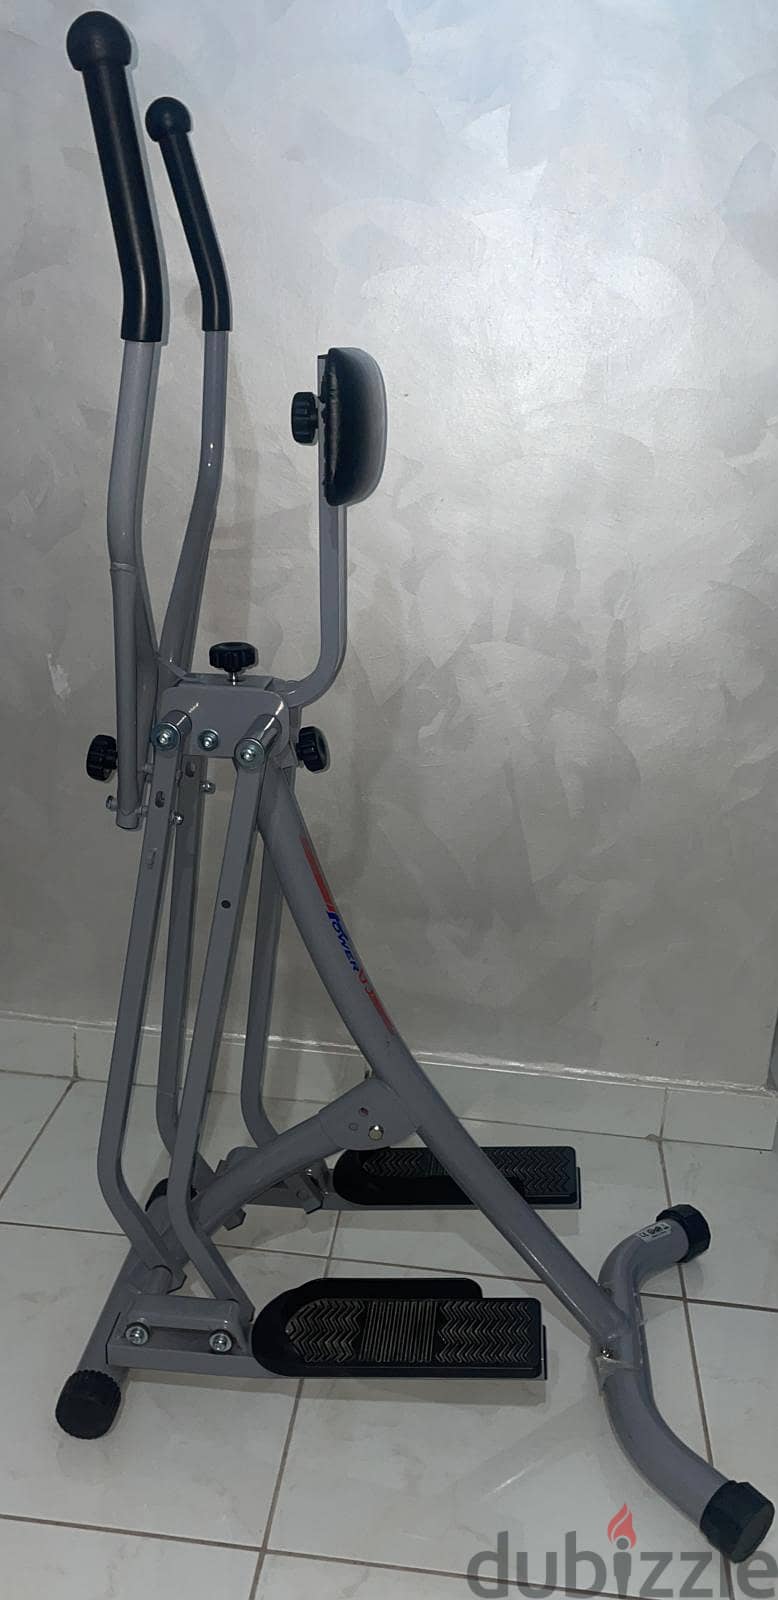 Brand new treadmill and cycling machine for sale in a very discounted 1